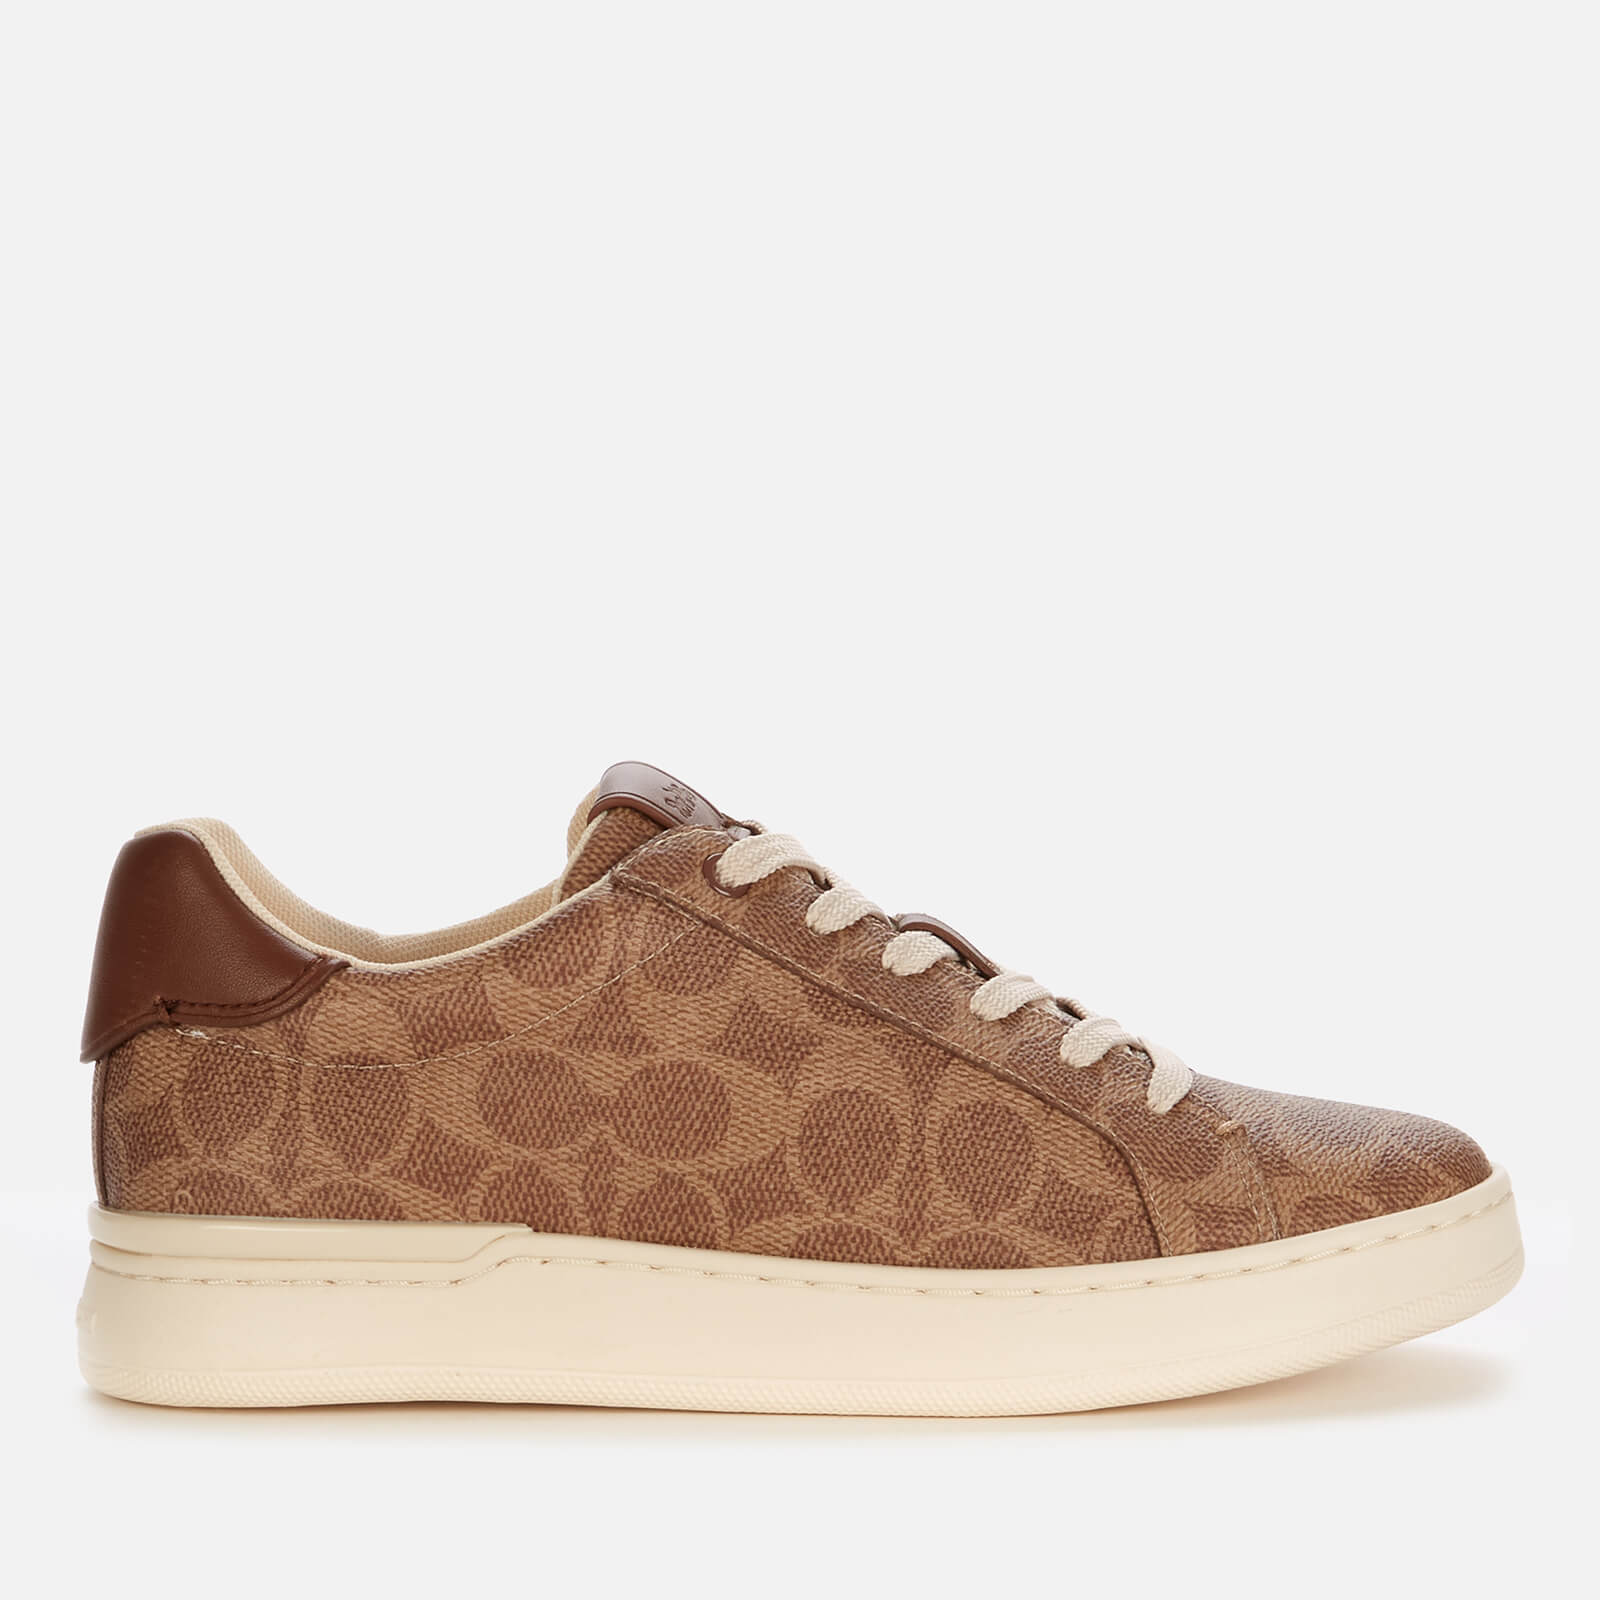 Coach Women’s Lowline Coated Canvas Trainers - Tan